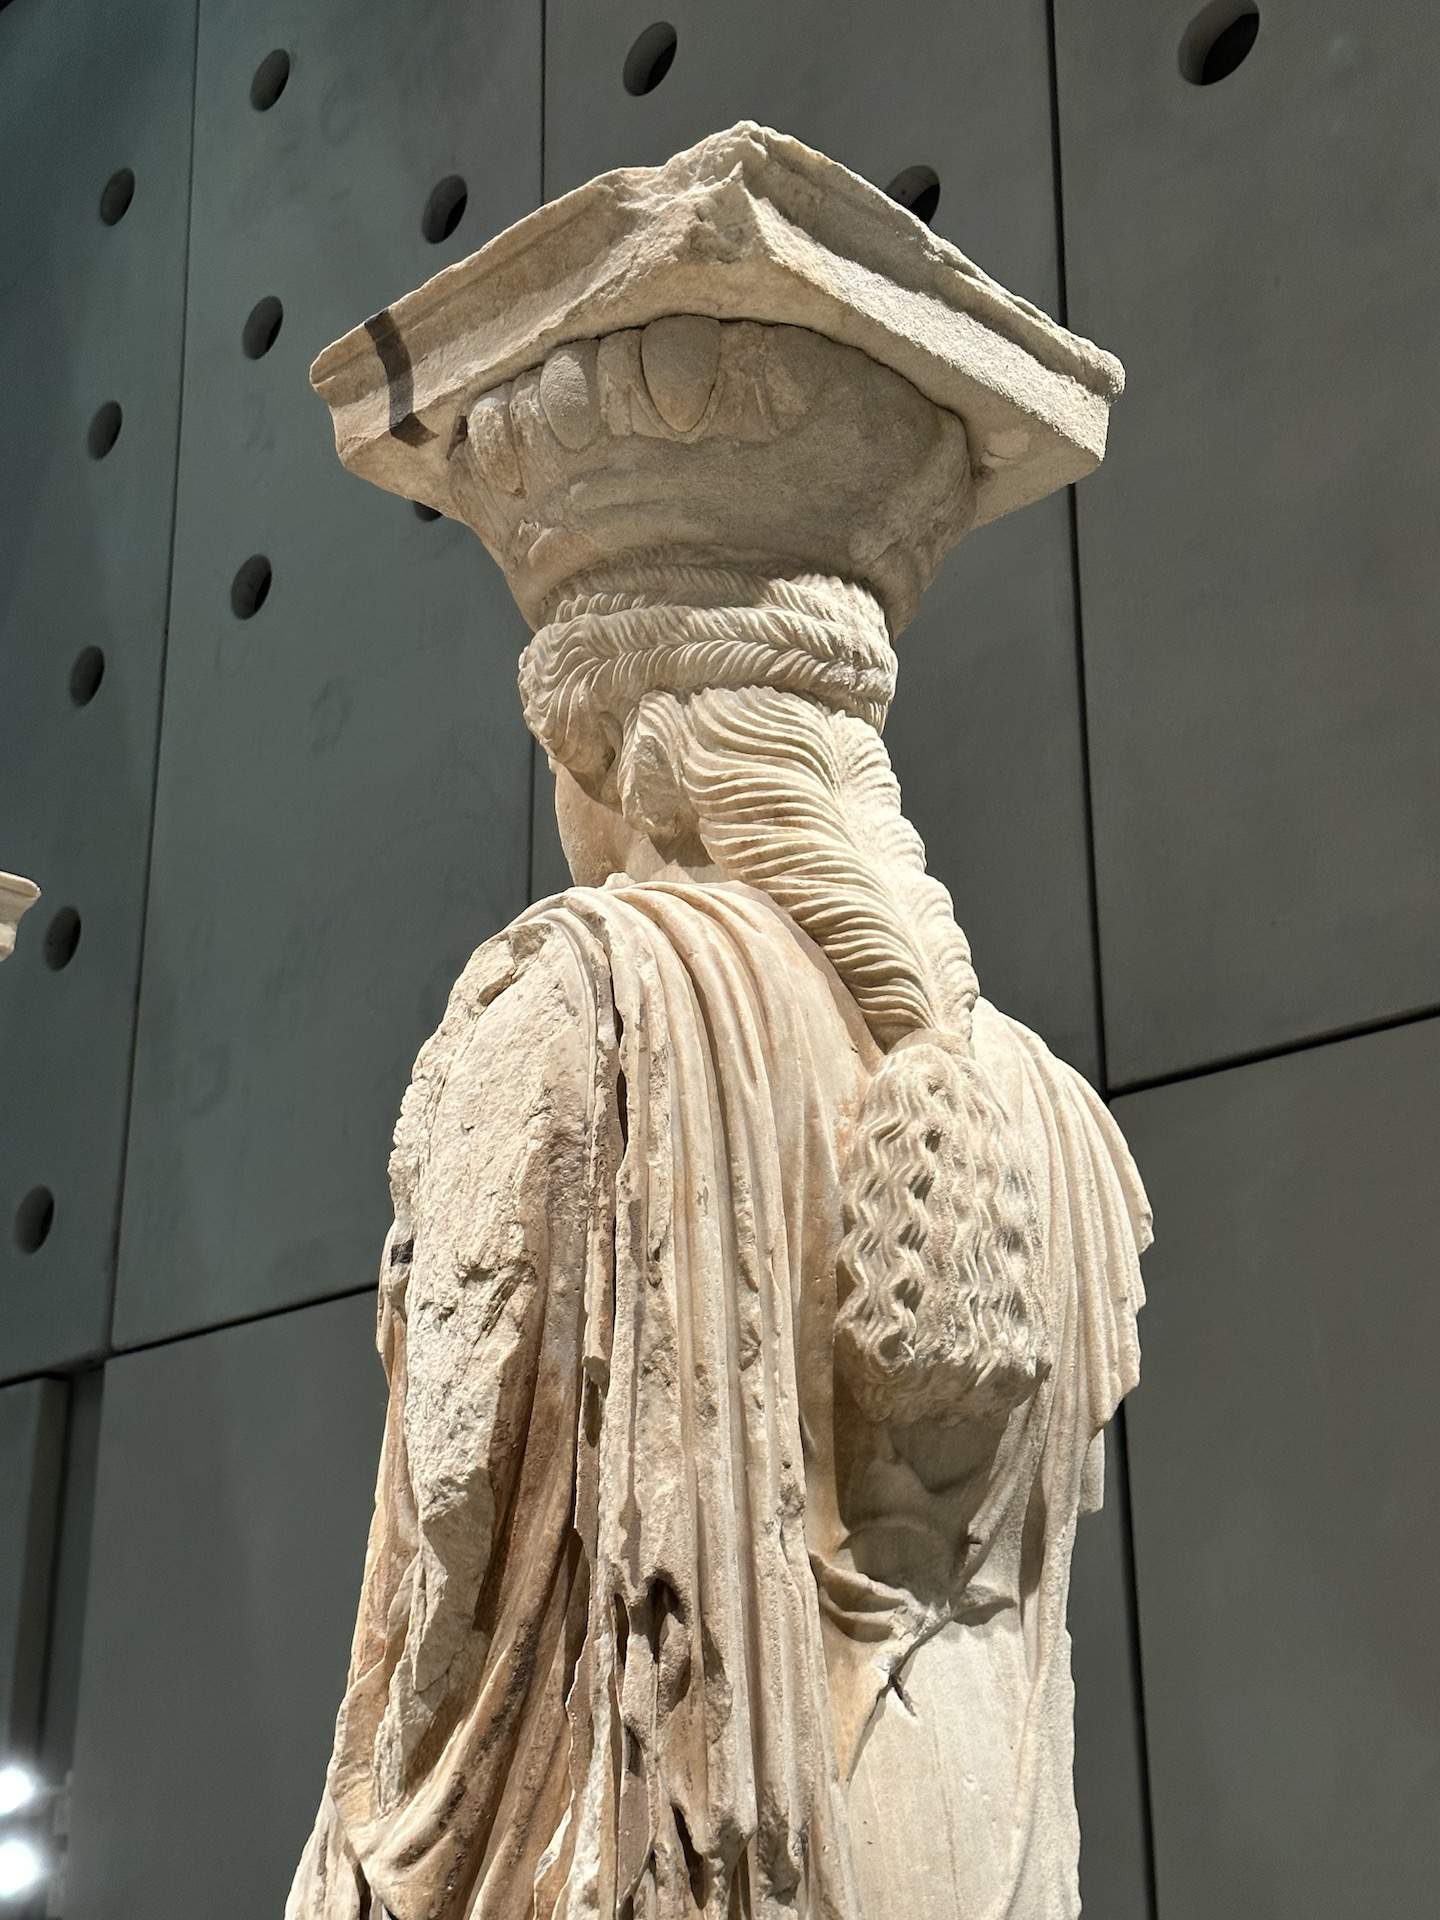 Back of a Caryatid at the Acropolis Museum in Athens, Greece